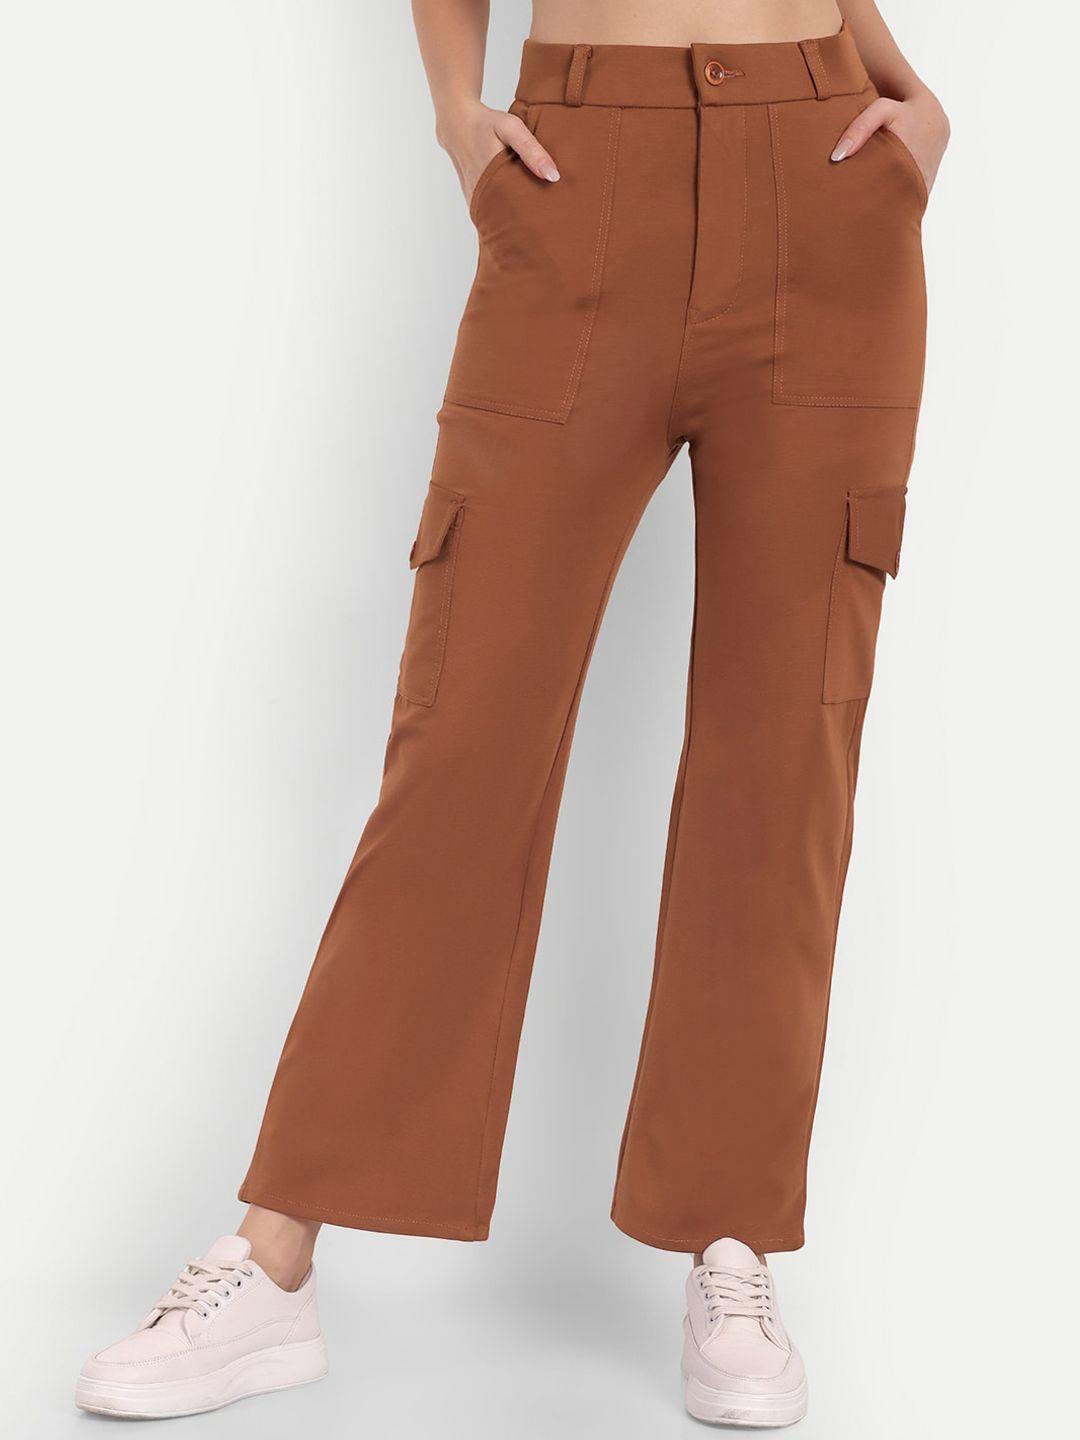 next-one-women-tan-smart-straight-fit-high-rise-easy-wash-cargos-trousers